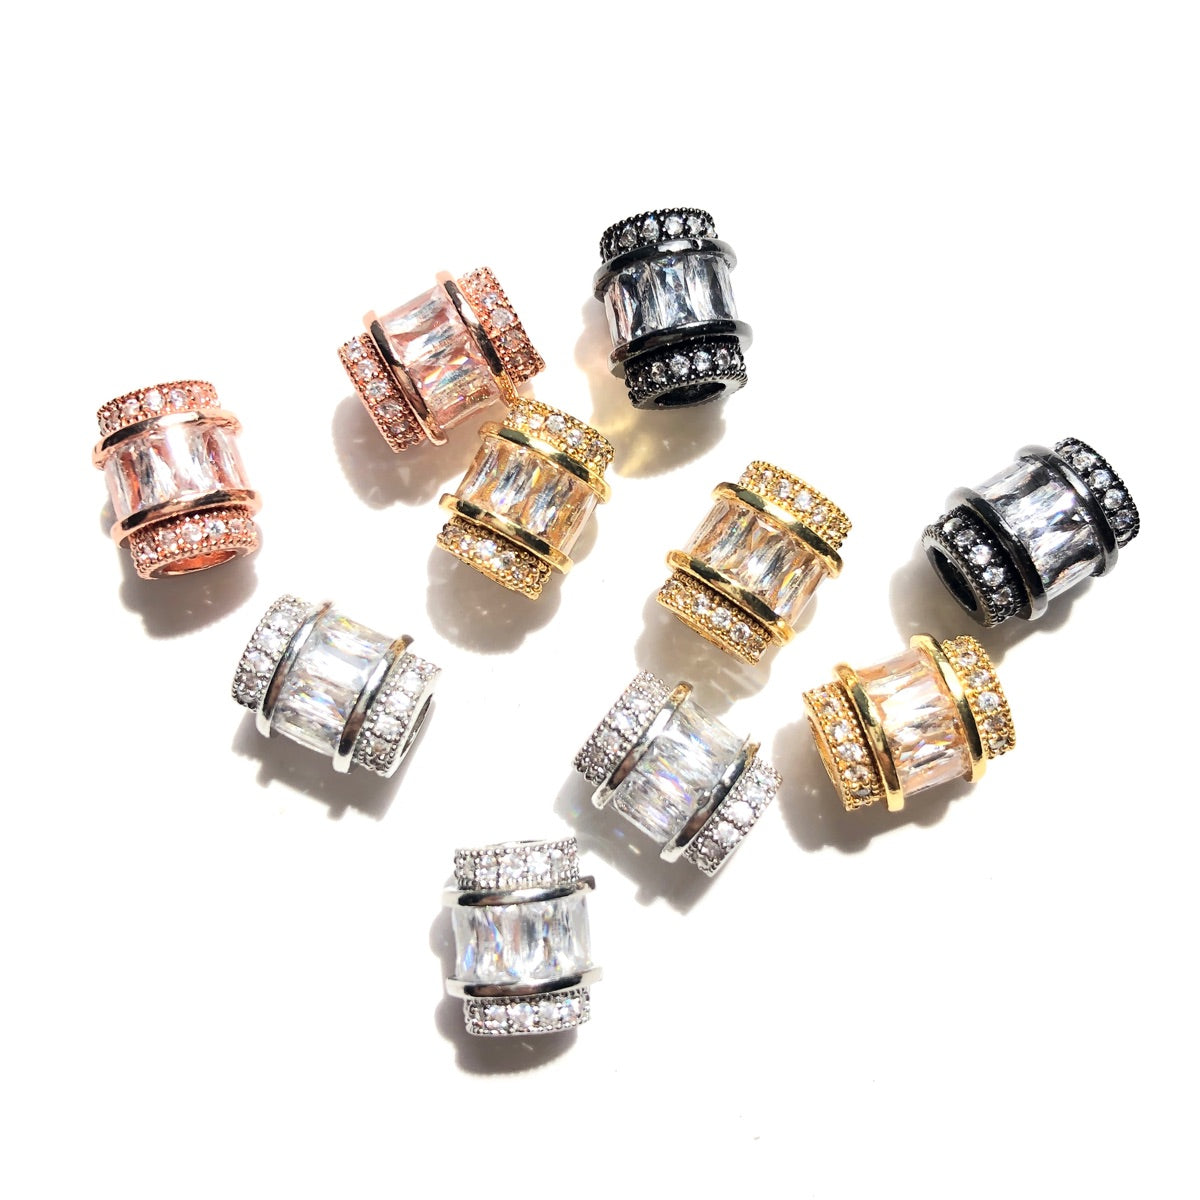 10pcs/lot 9.6/12mm Clear CZ Paved Big Hole Spacers Mix Colors CZ Paved Spacers Big Hole Beads New Spacers Arrivals Charms Beads Beyond